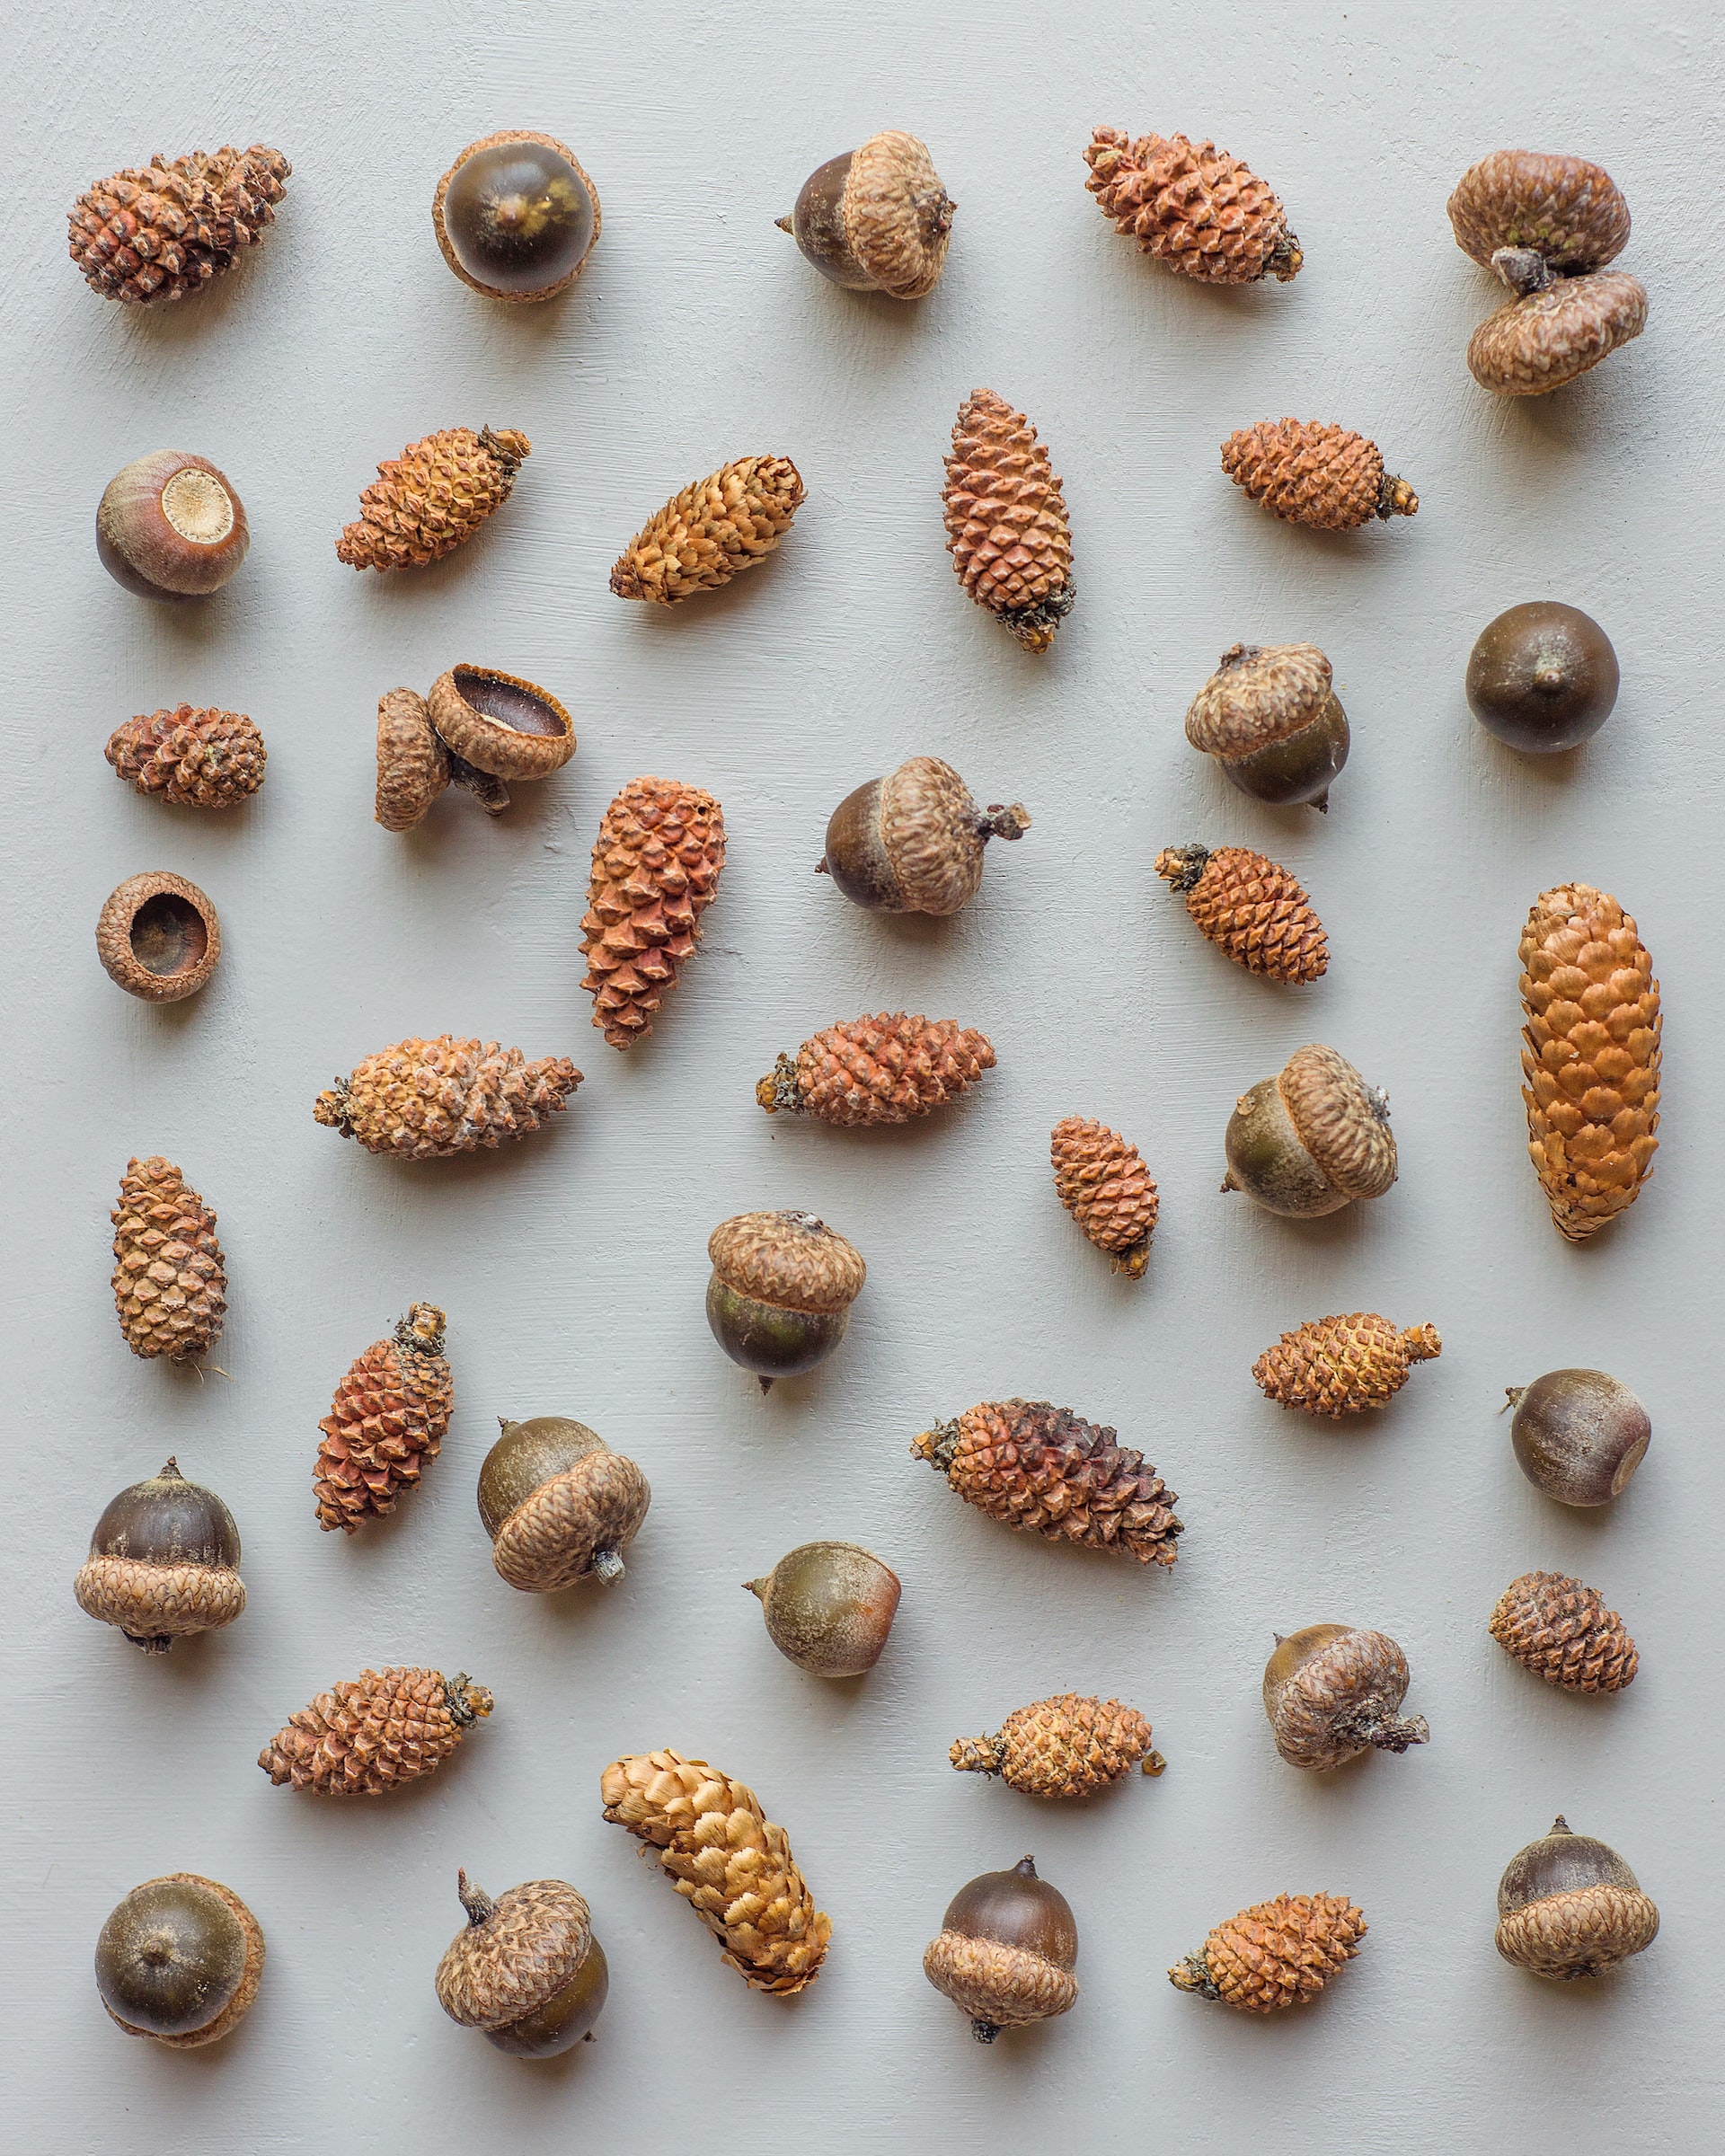 A photo by Cary Bates of a variety of acorns